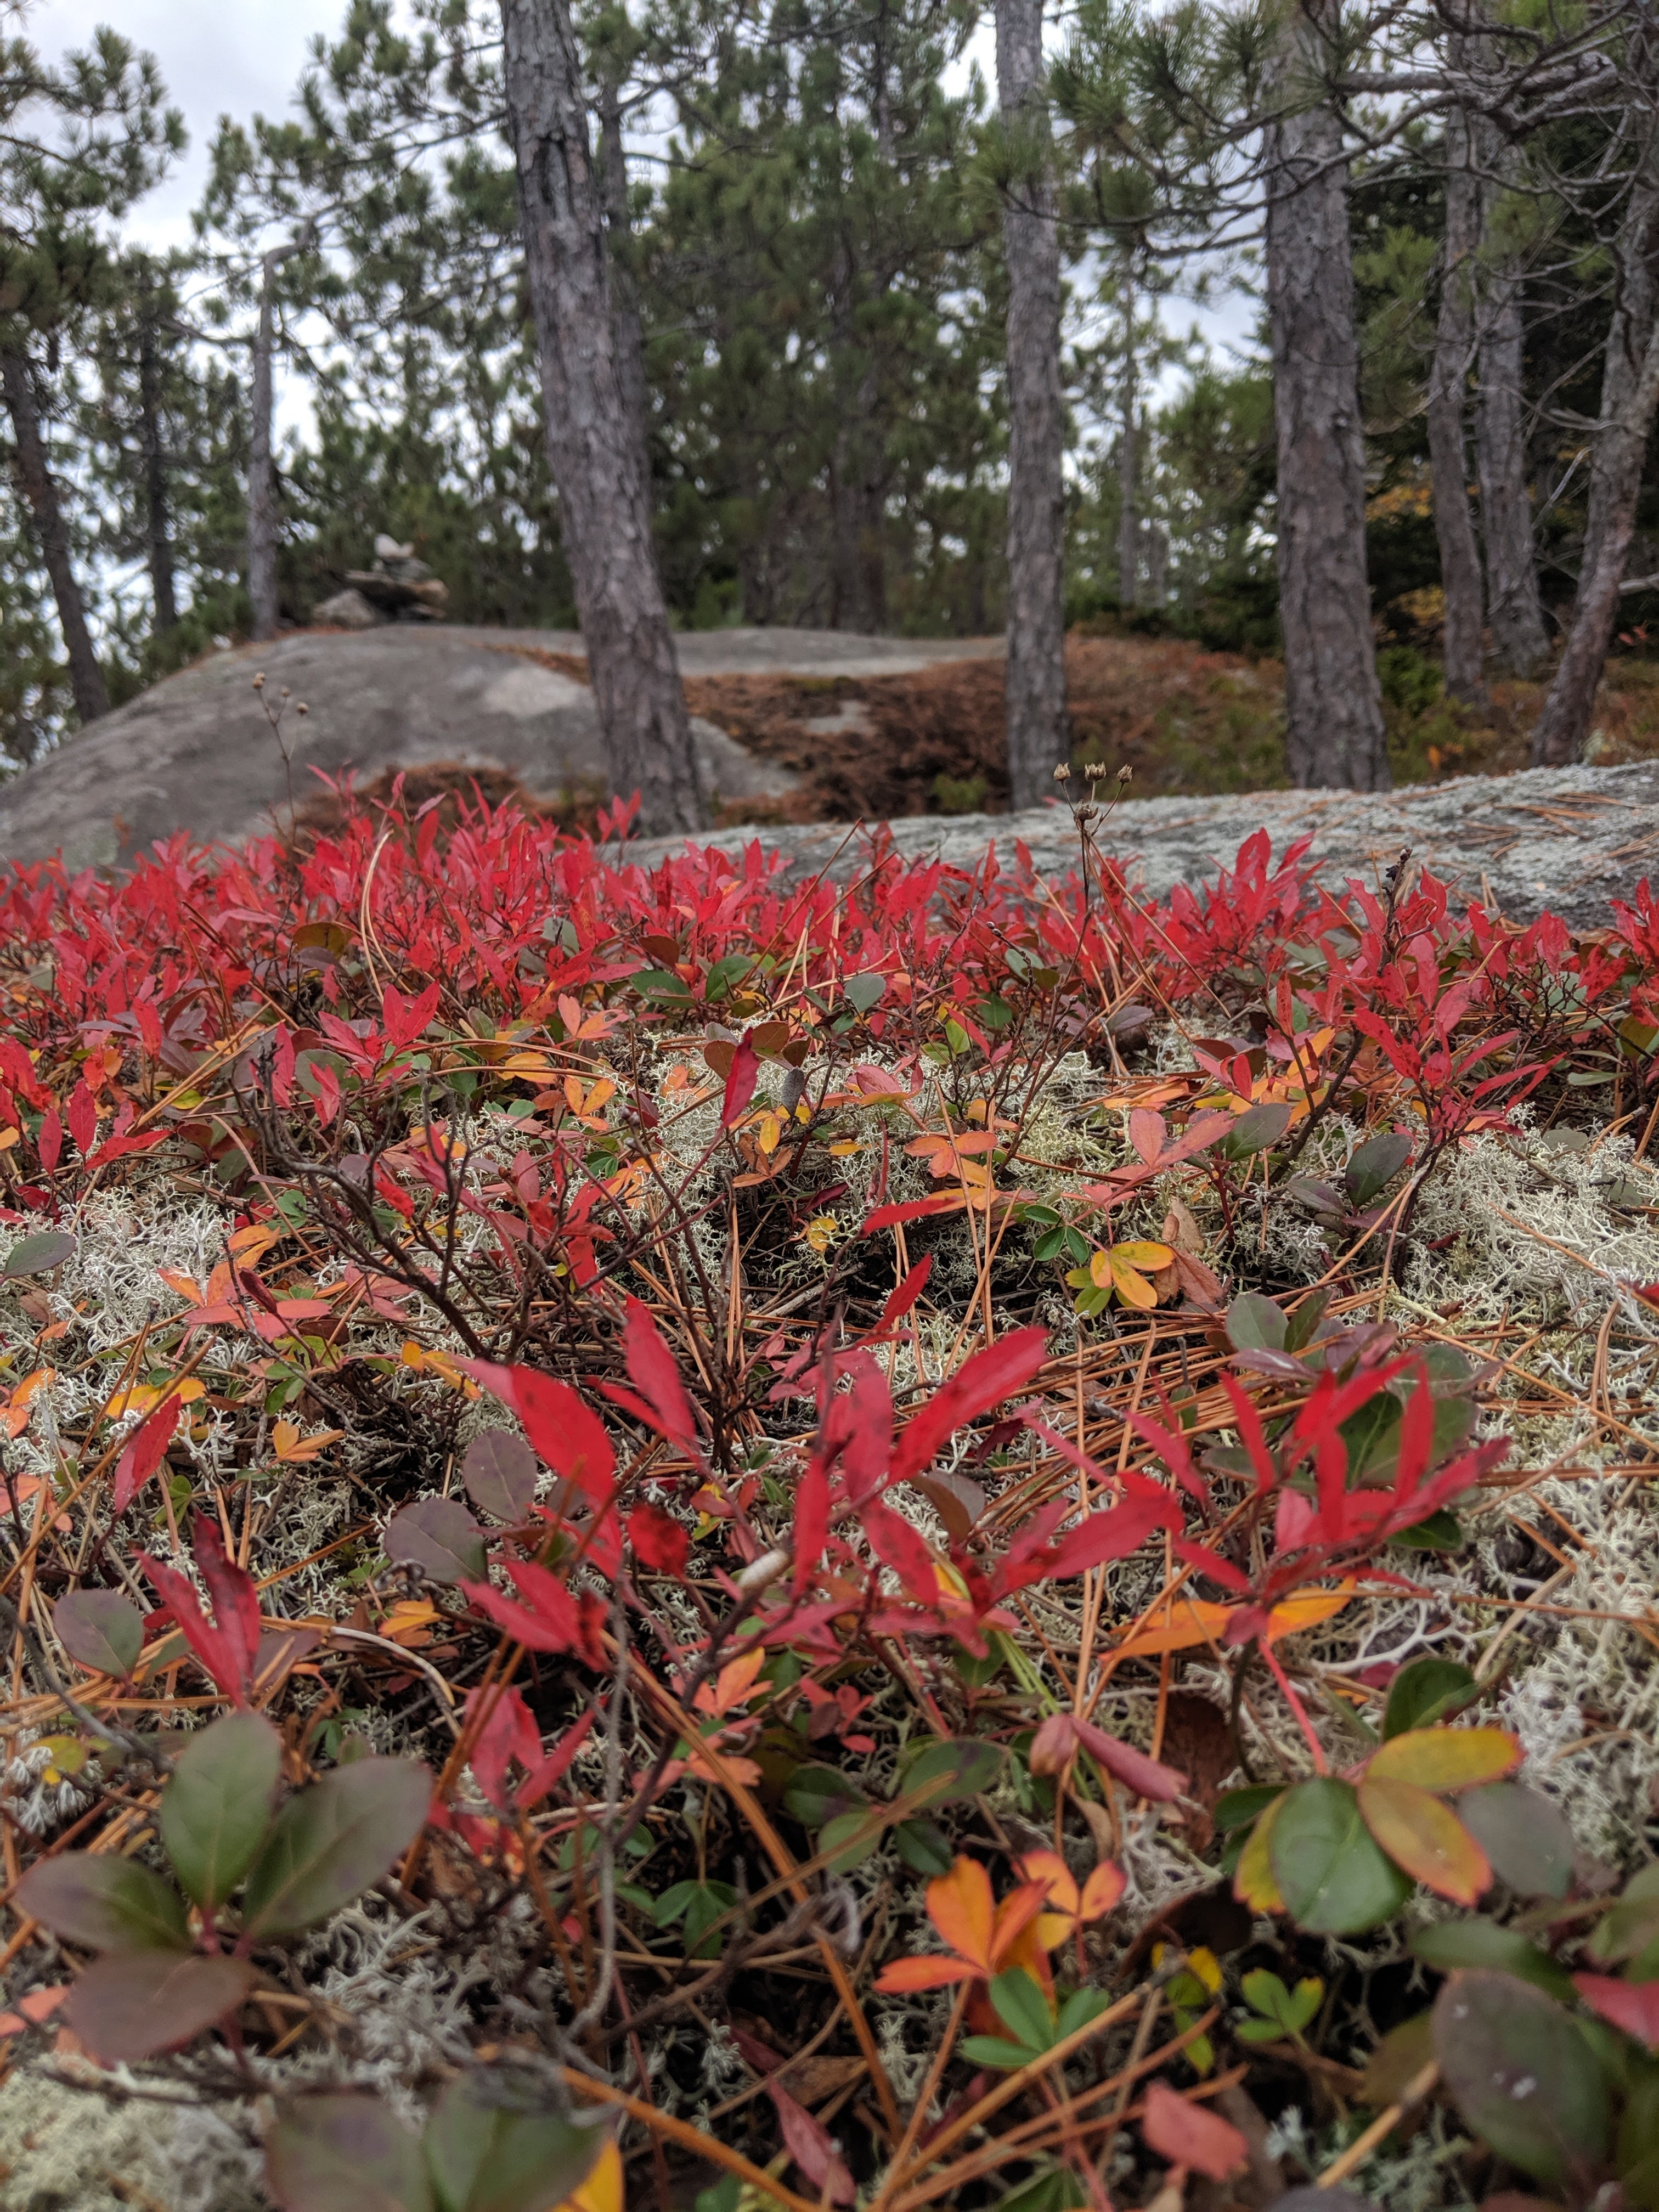 The low bush blueberries make the ground look like it's on fire.